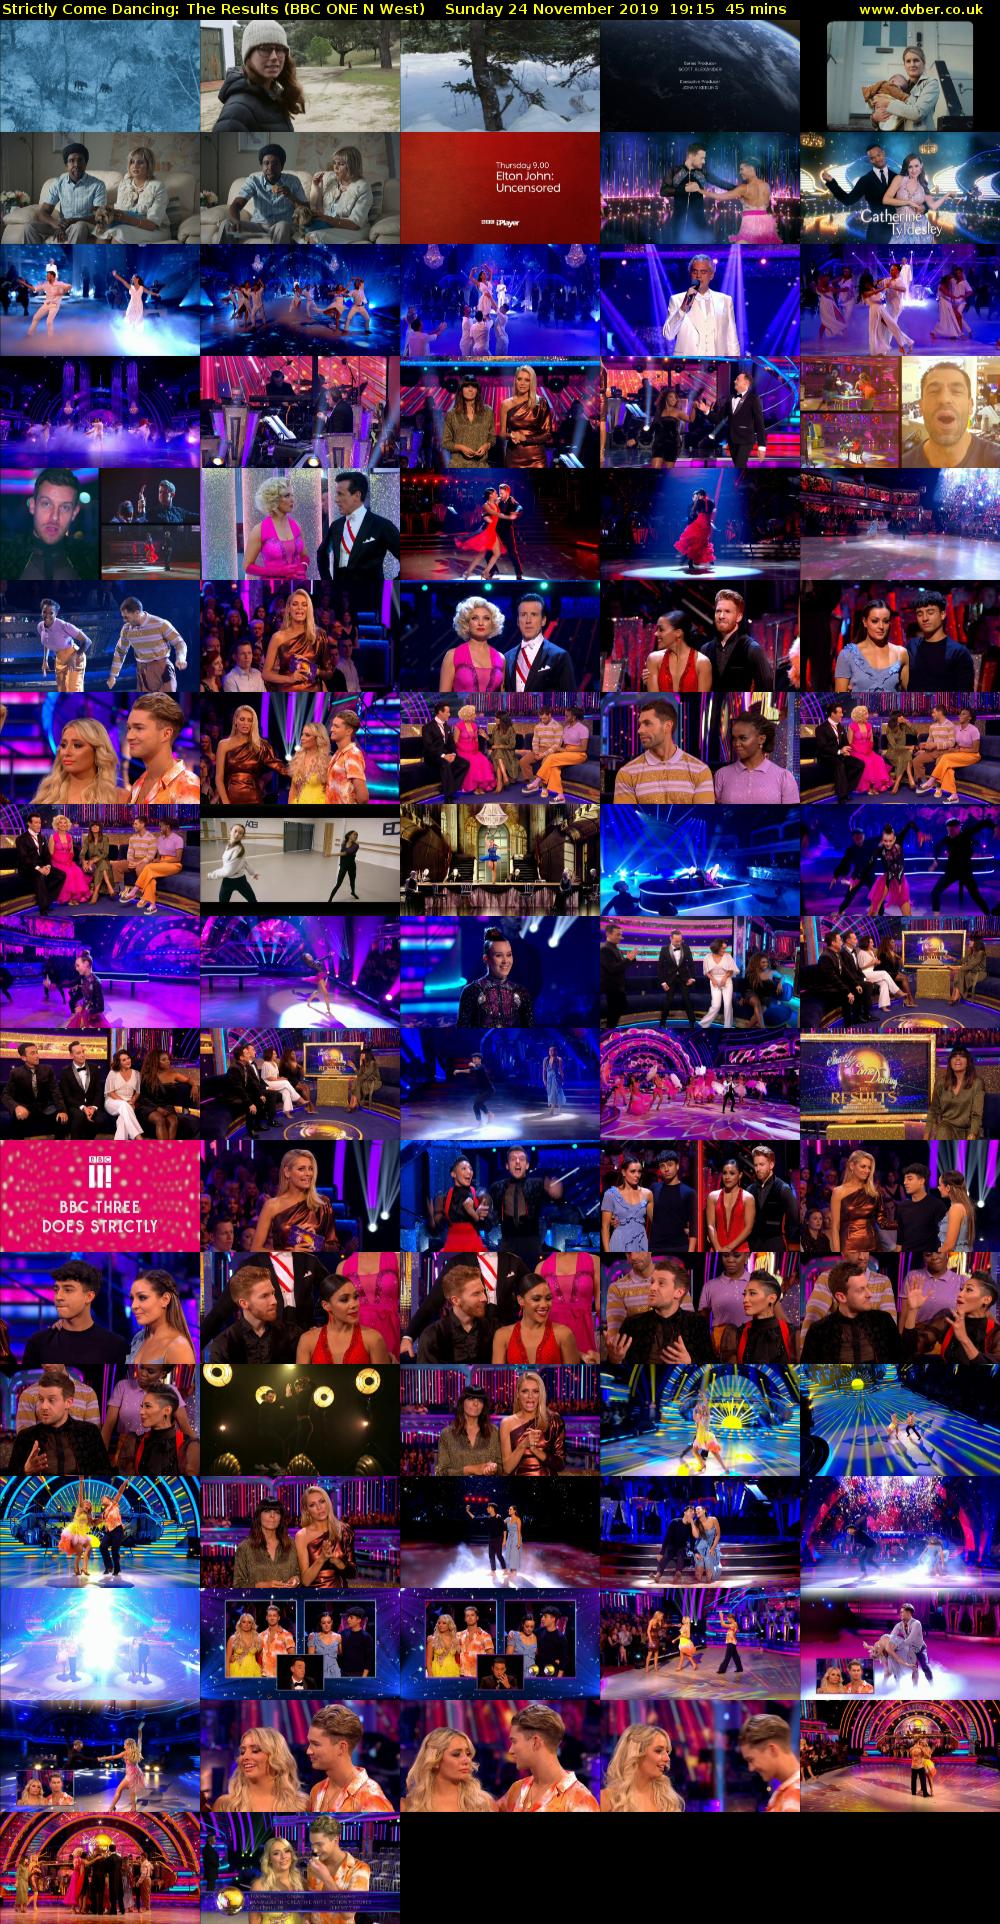 Strictly Come Dancing: The Results (BBC ONE N West) Sunday 24 November 2019 19:15 - 20:00